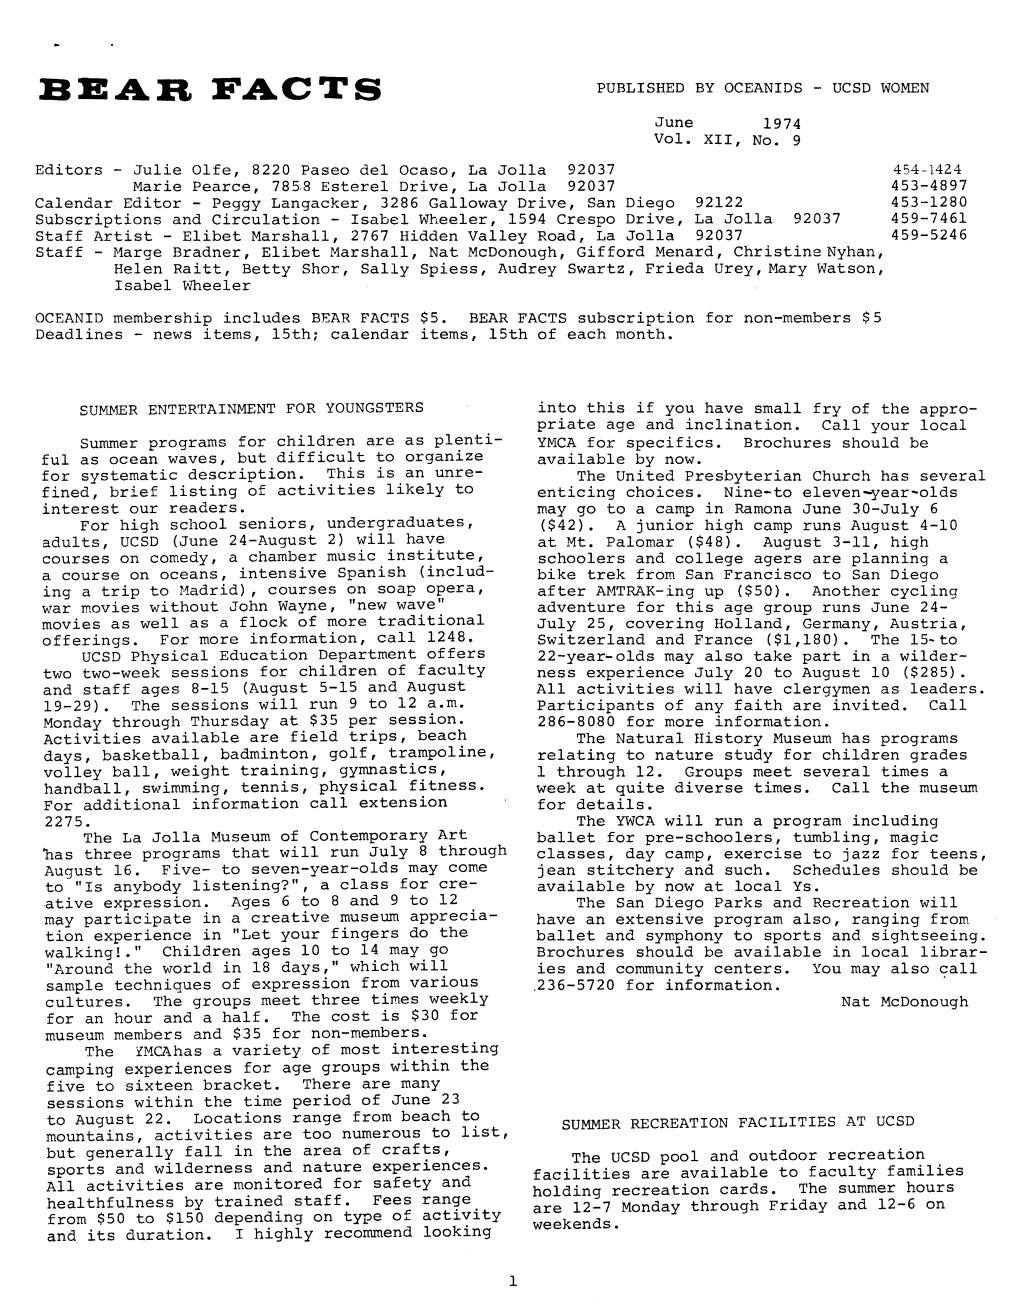 BBAB FACTS PUBLISHED by OCEANIDS - UCSD WOMEN June 1974 Vol